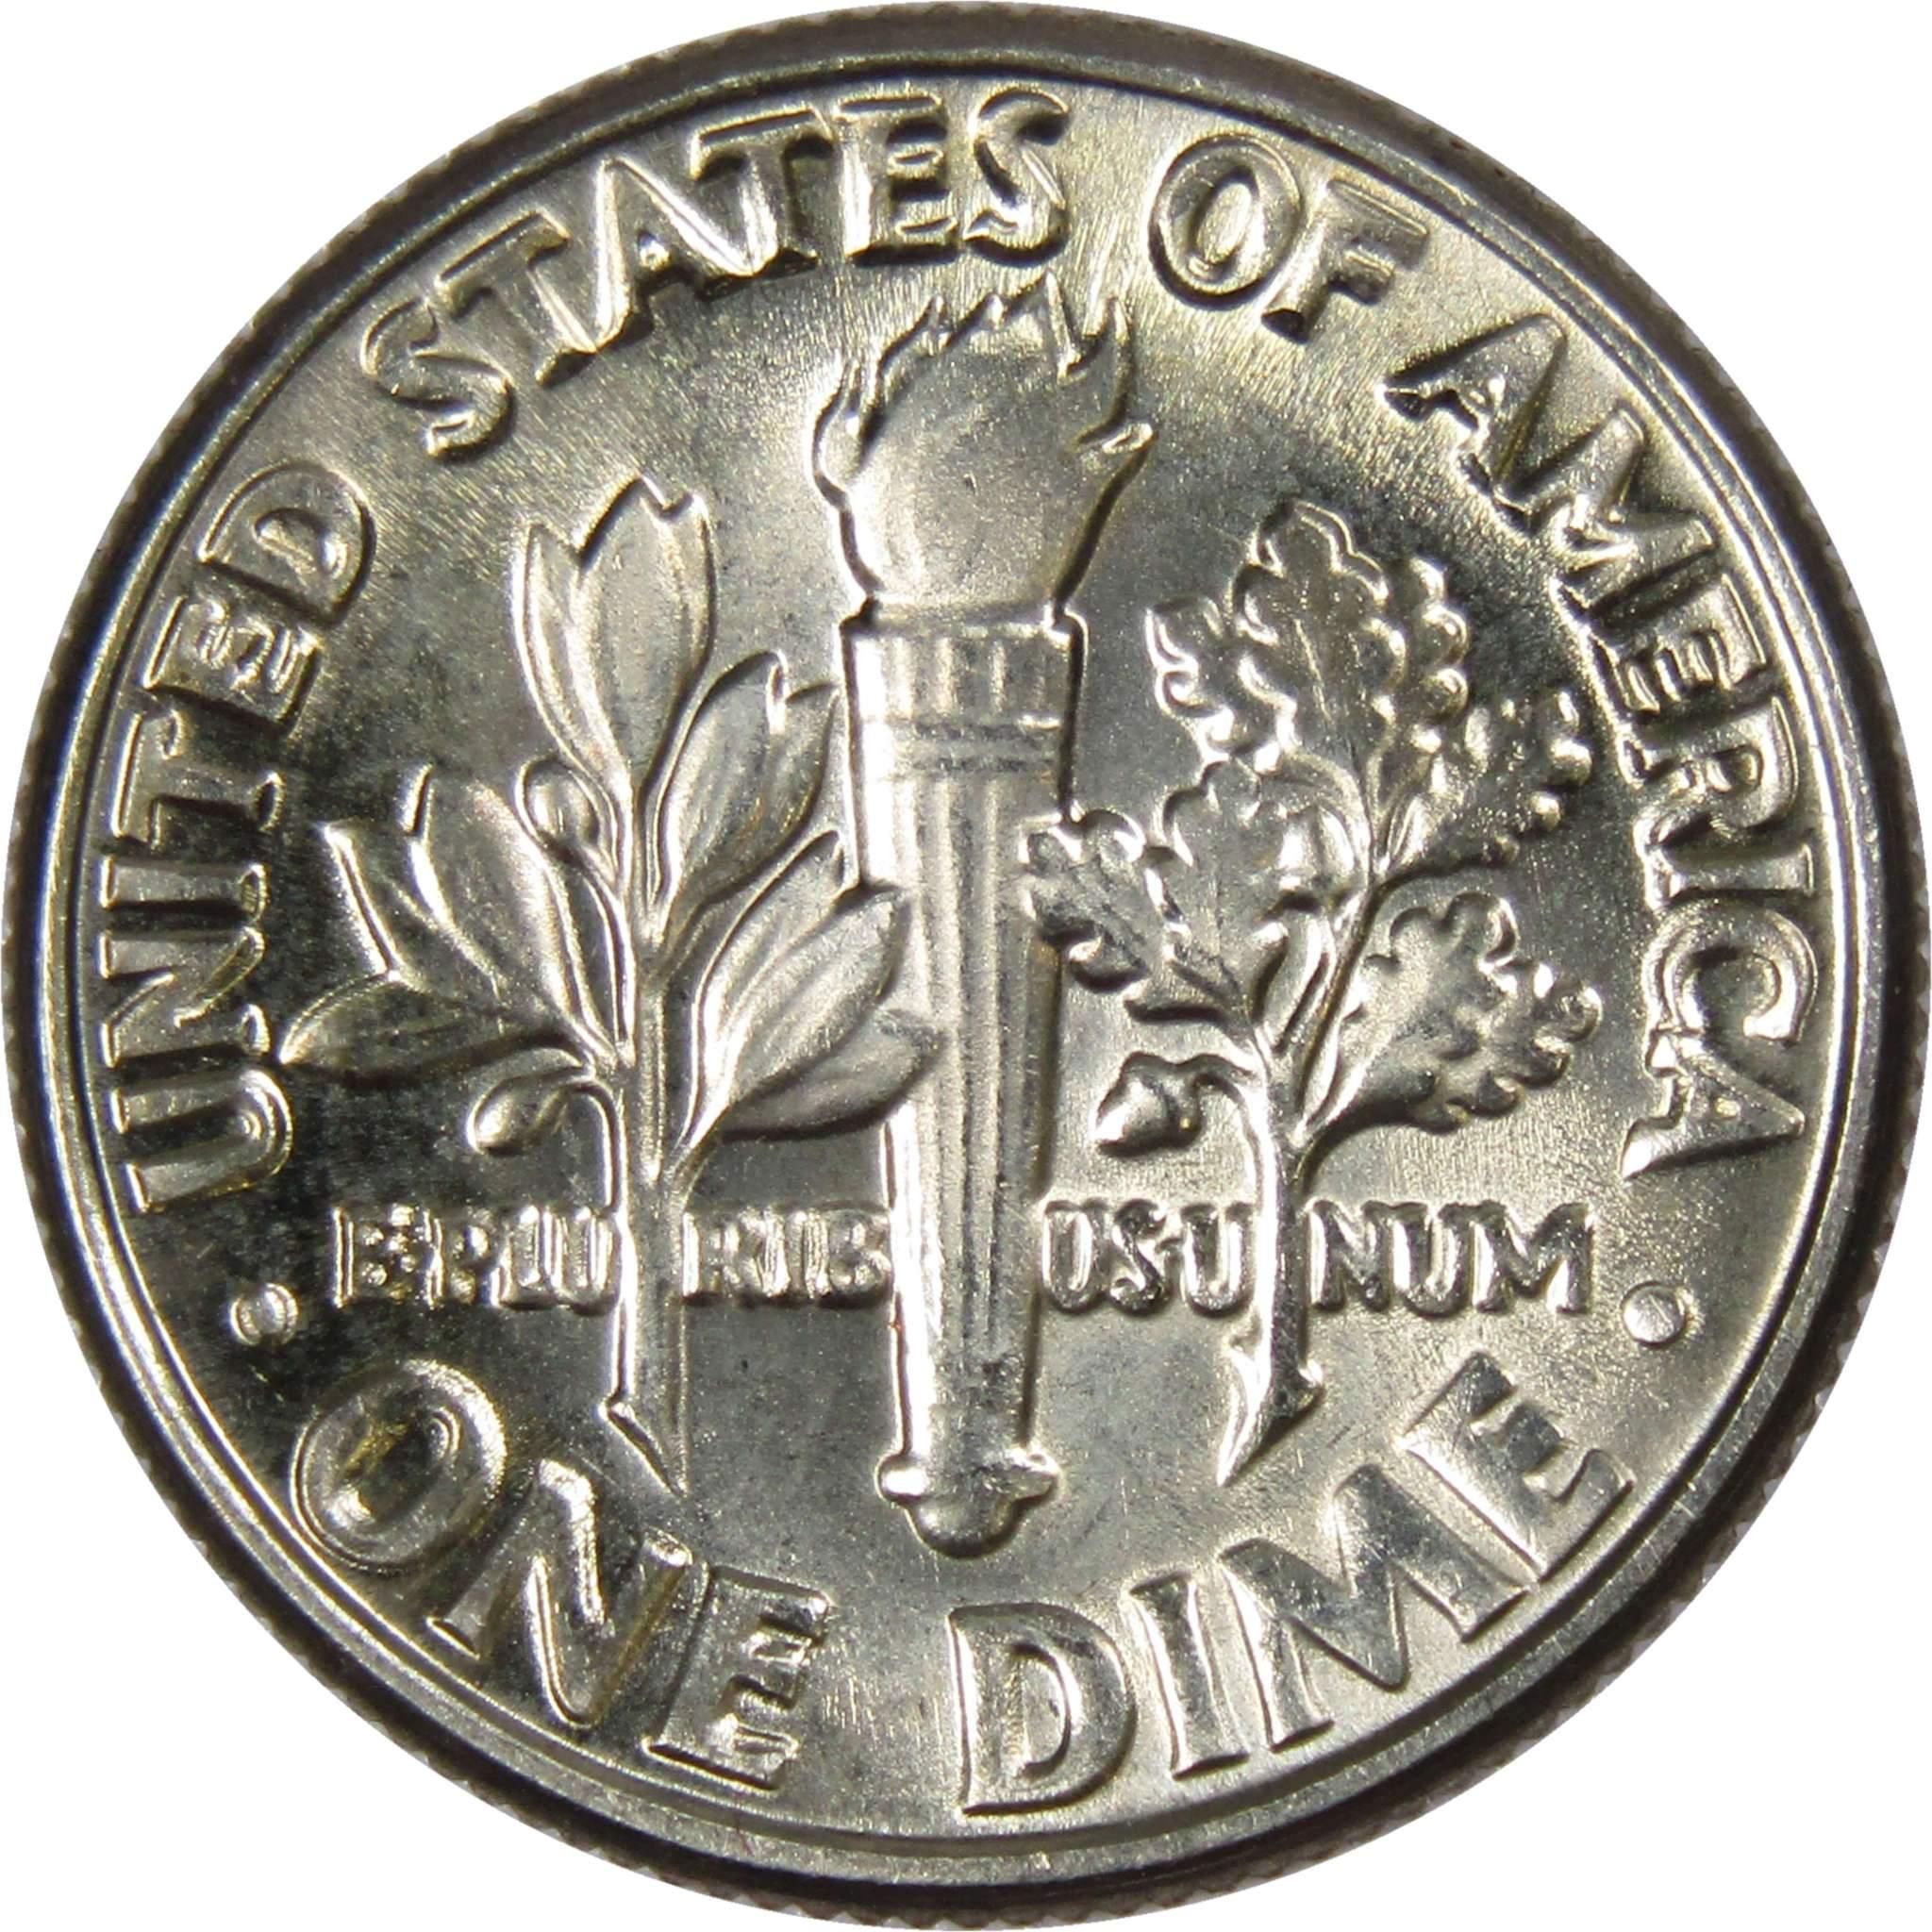 1983 D Roosevelt Dime BU Uncirculated Mint State 10c US Coin Collectible